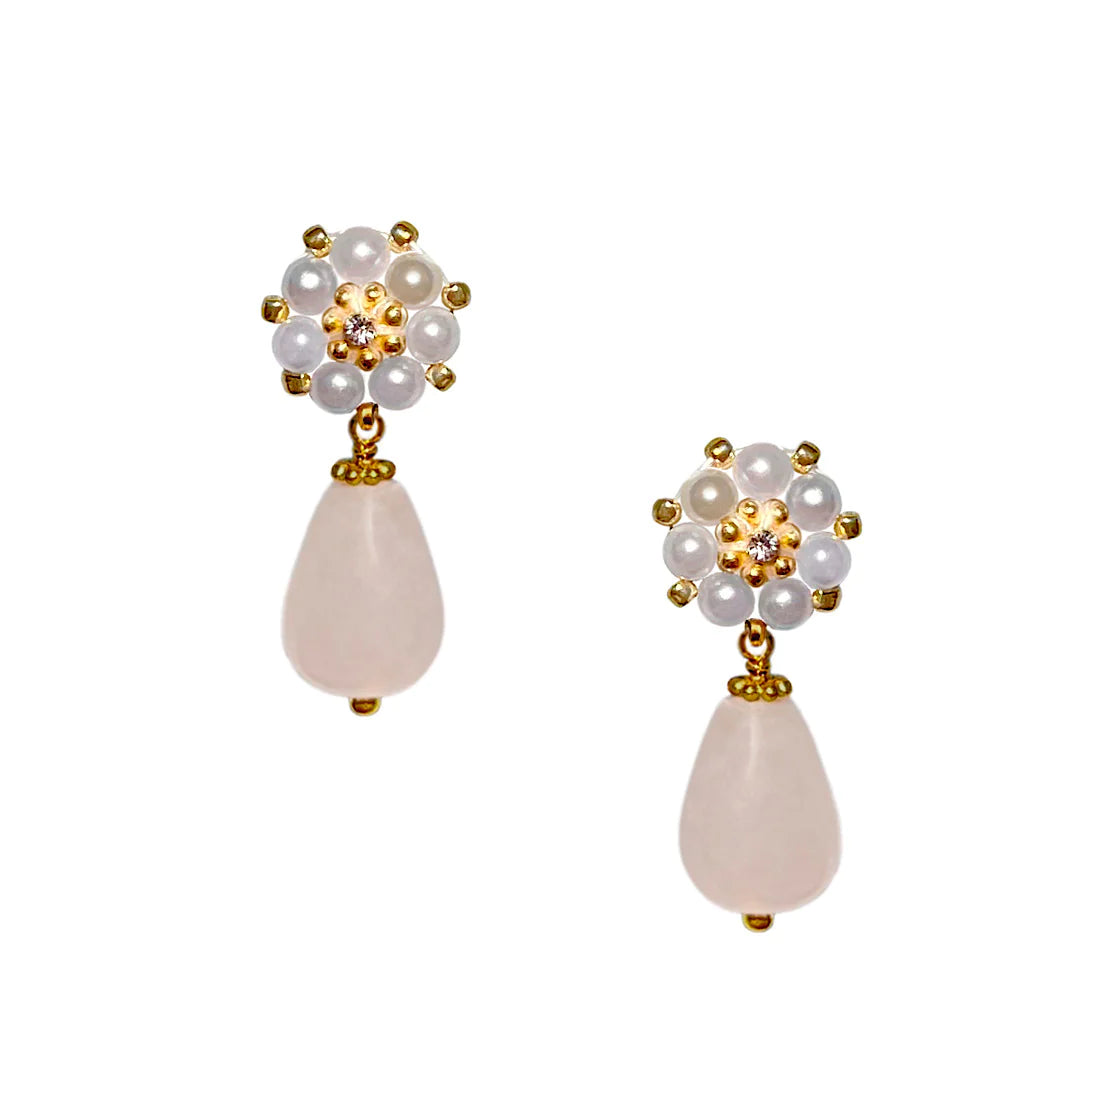 A pair of rose quartz earrings with pearls and Swarovski crystals.